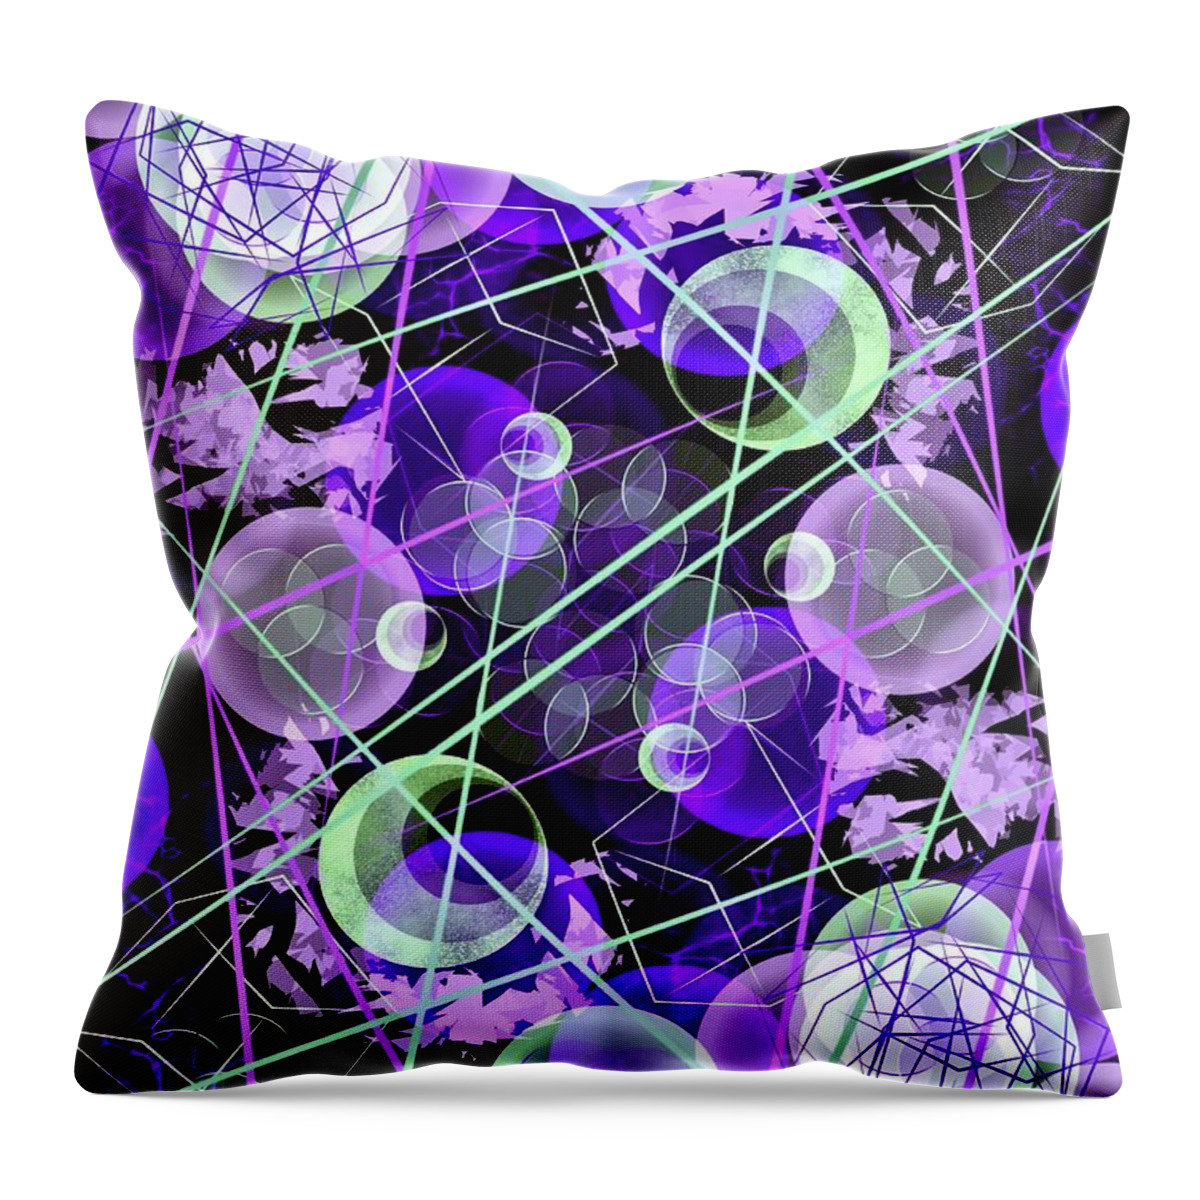 Eternal Optimism Abstract Throw Pillow featuring the digital art Eternal Optimism by Laurie's Intuitive